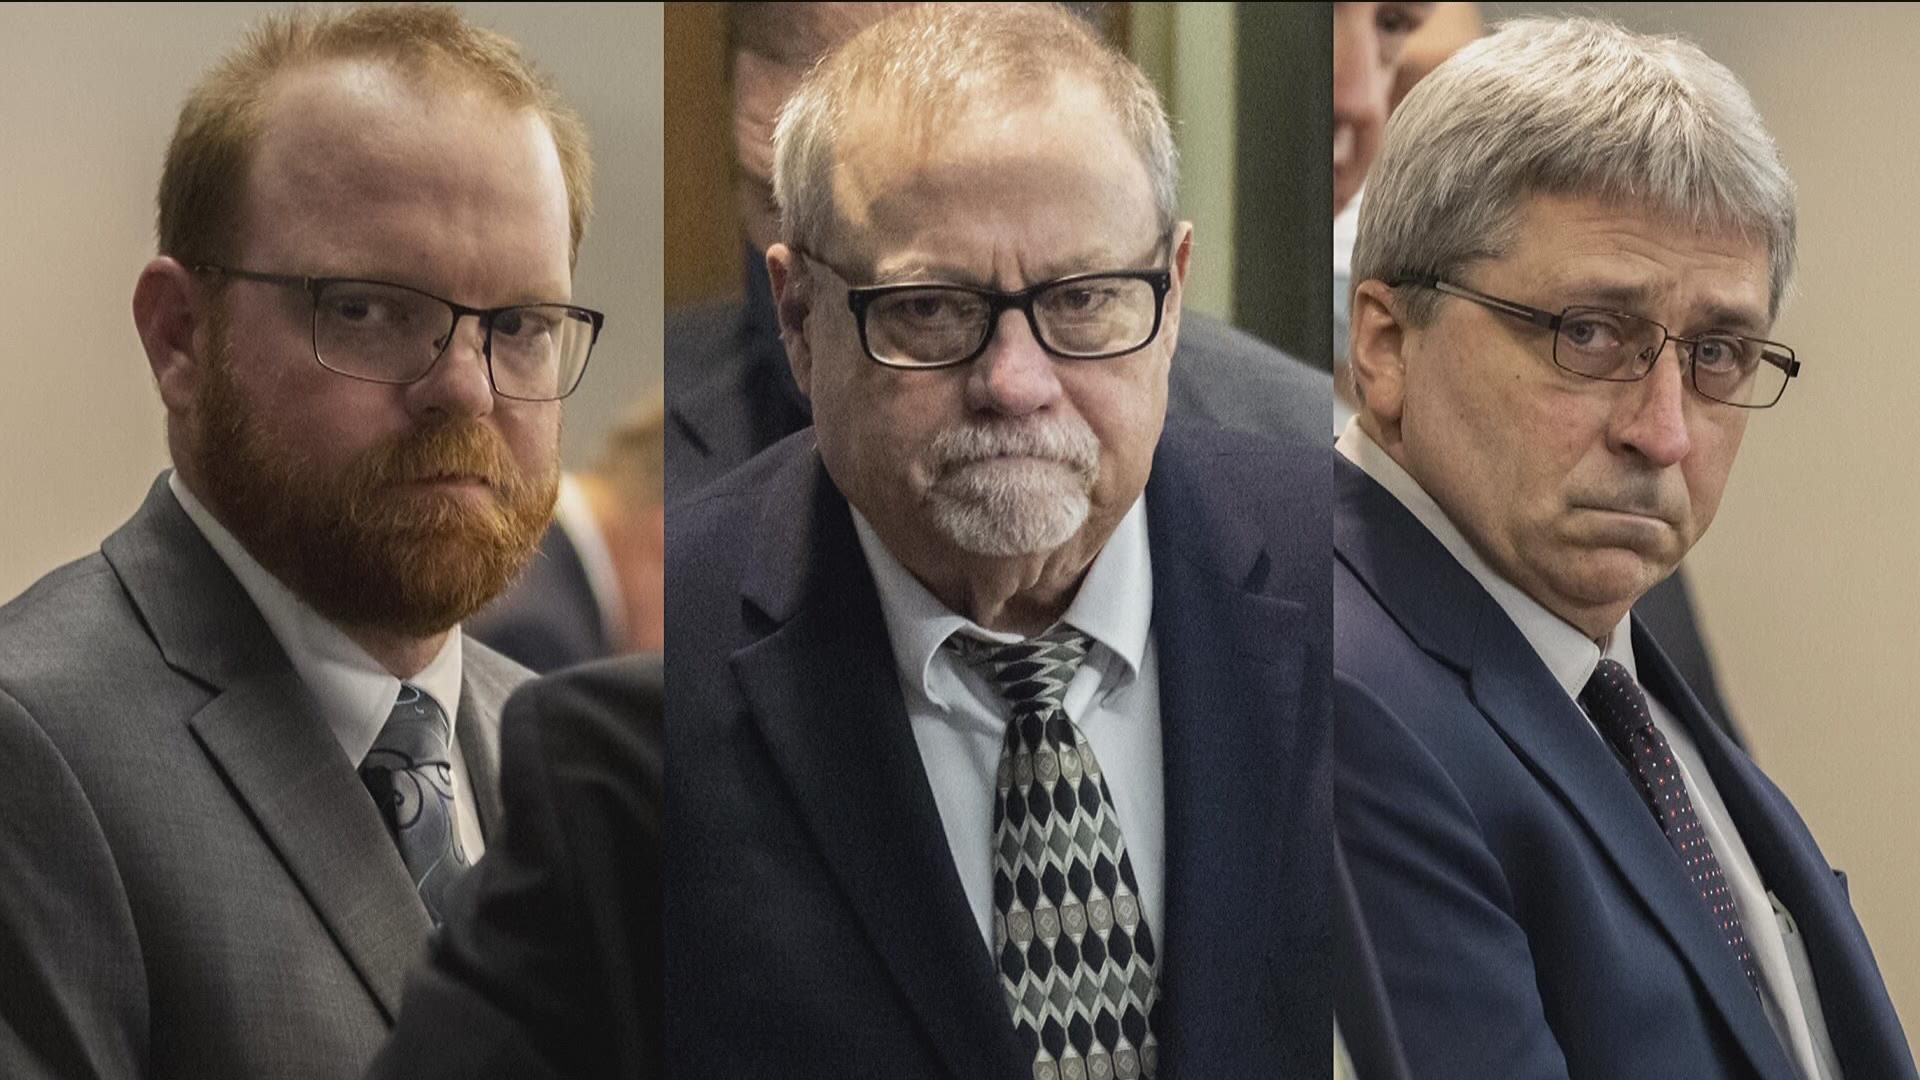 In a separate motion, prosecutors are seeking to prevent the three men from profiting from the murder of Ahmaud Arbery through book or movie deals.